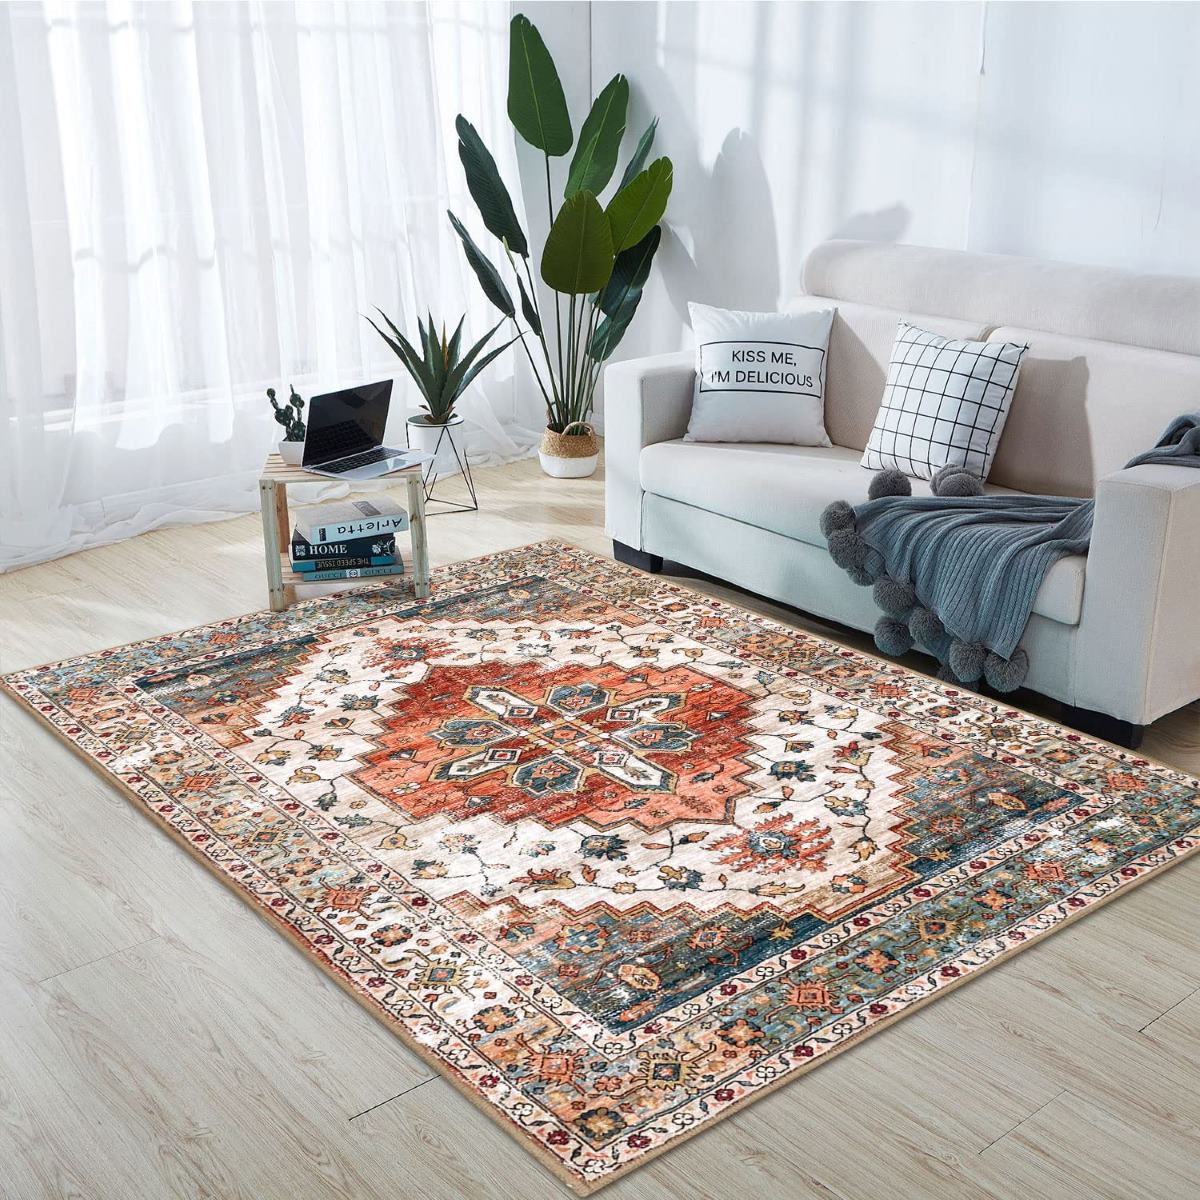 How To Clean Ruggable Rugs